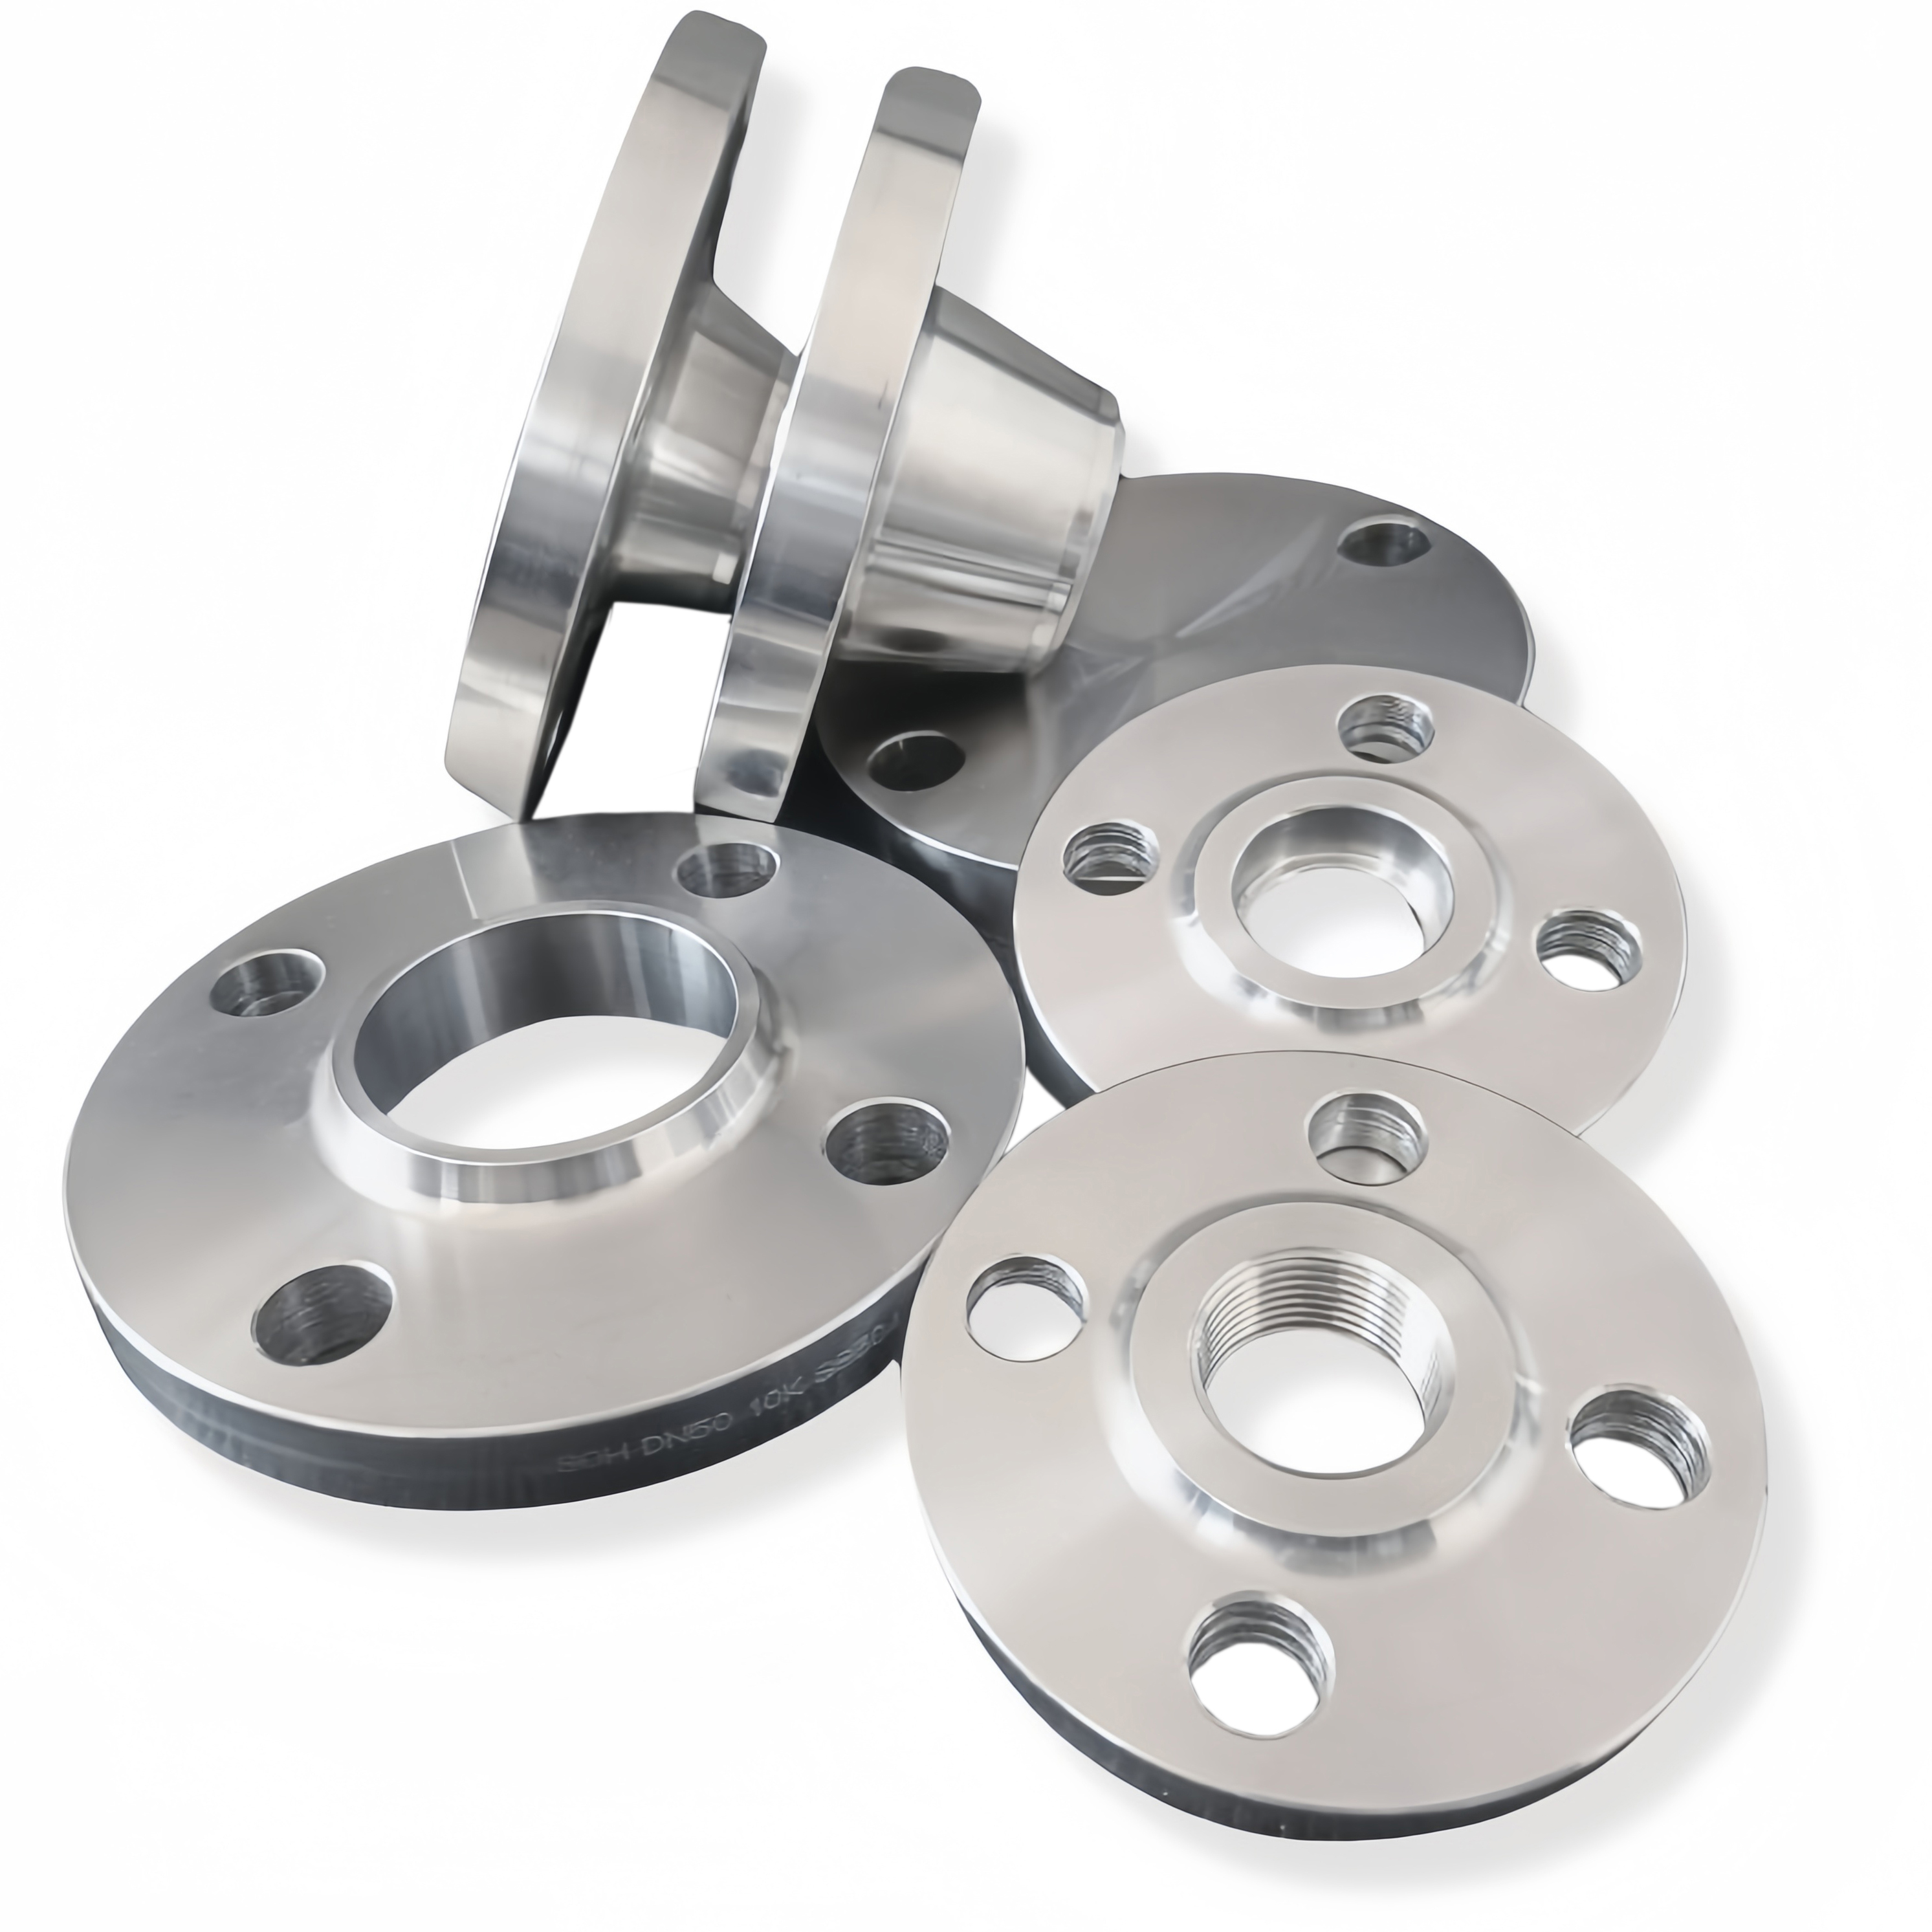 Importance of Ljff flange and P250gh flange in industrial applications